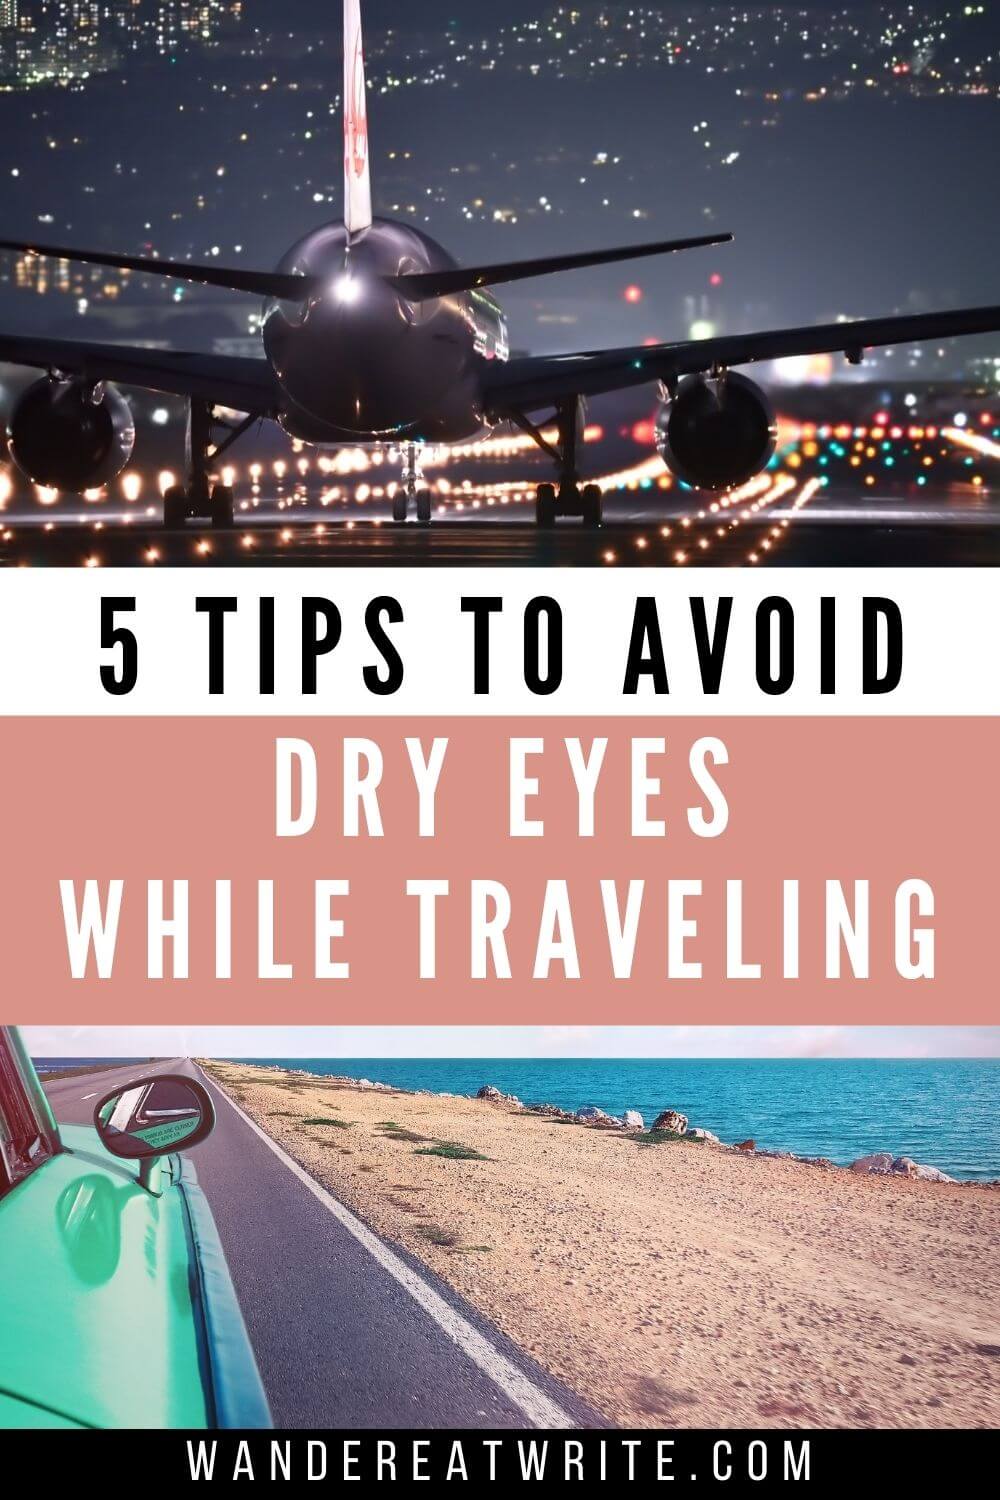 5 tips to avoid dry eyes while traveling